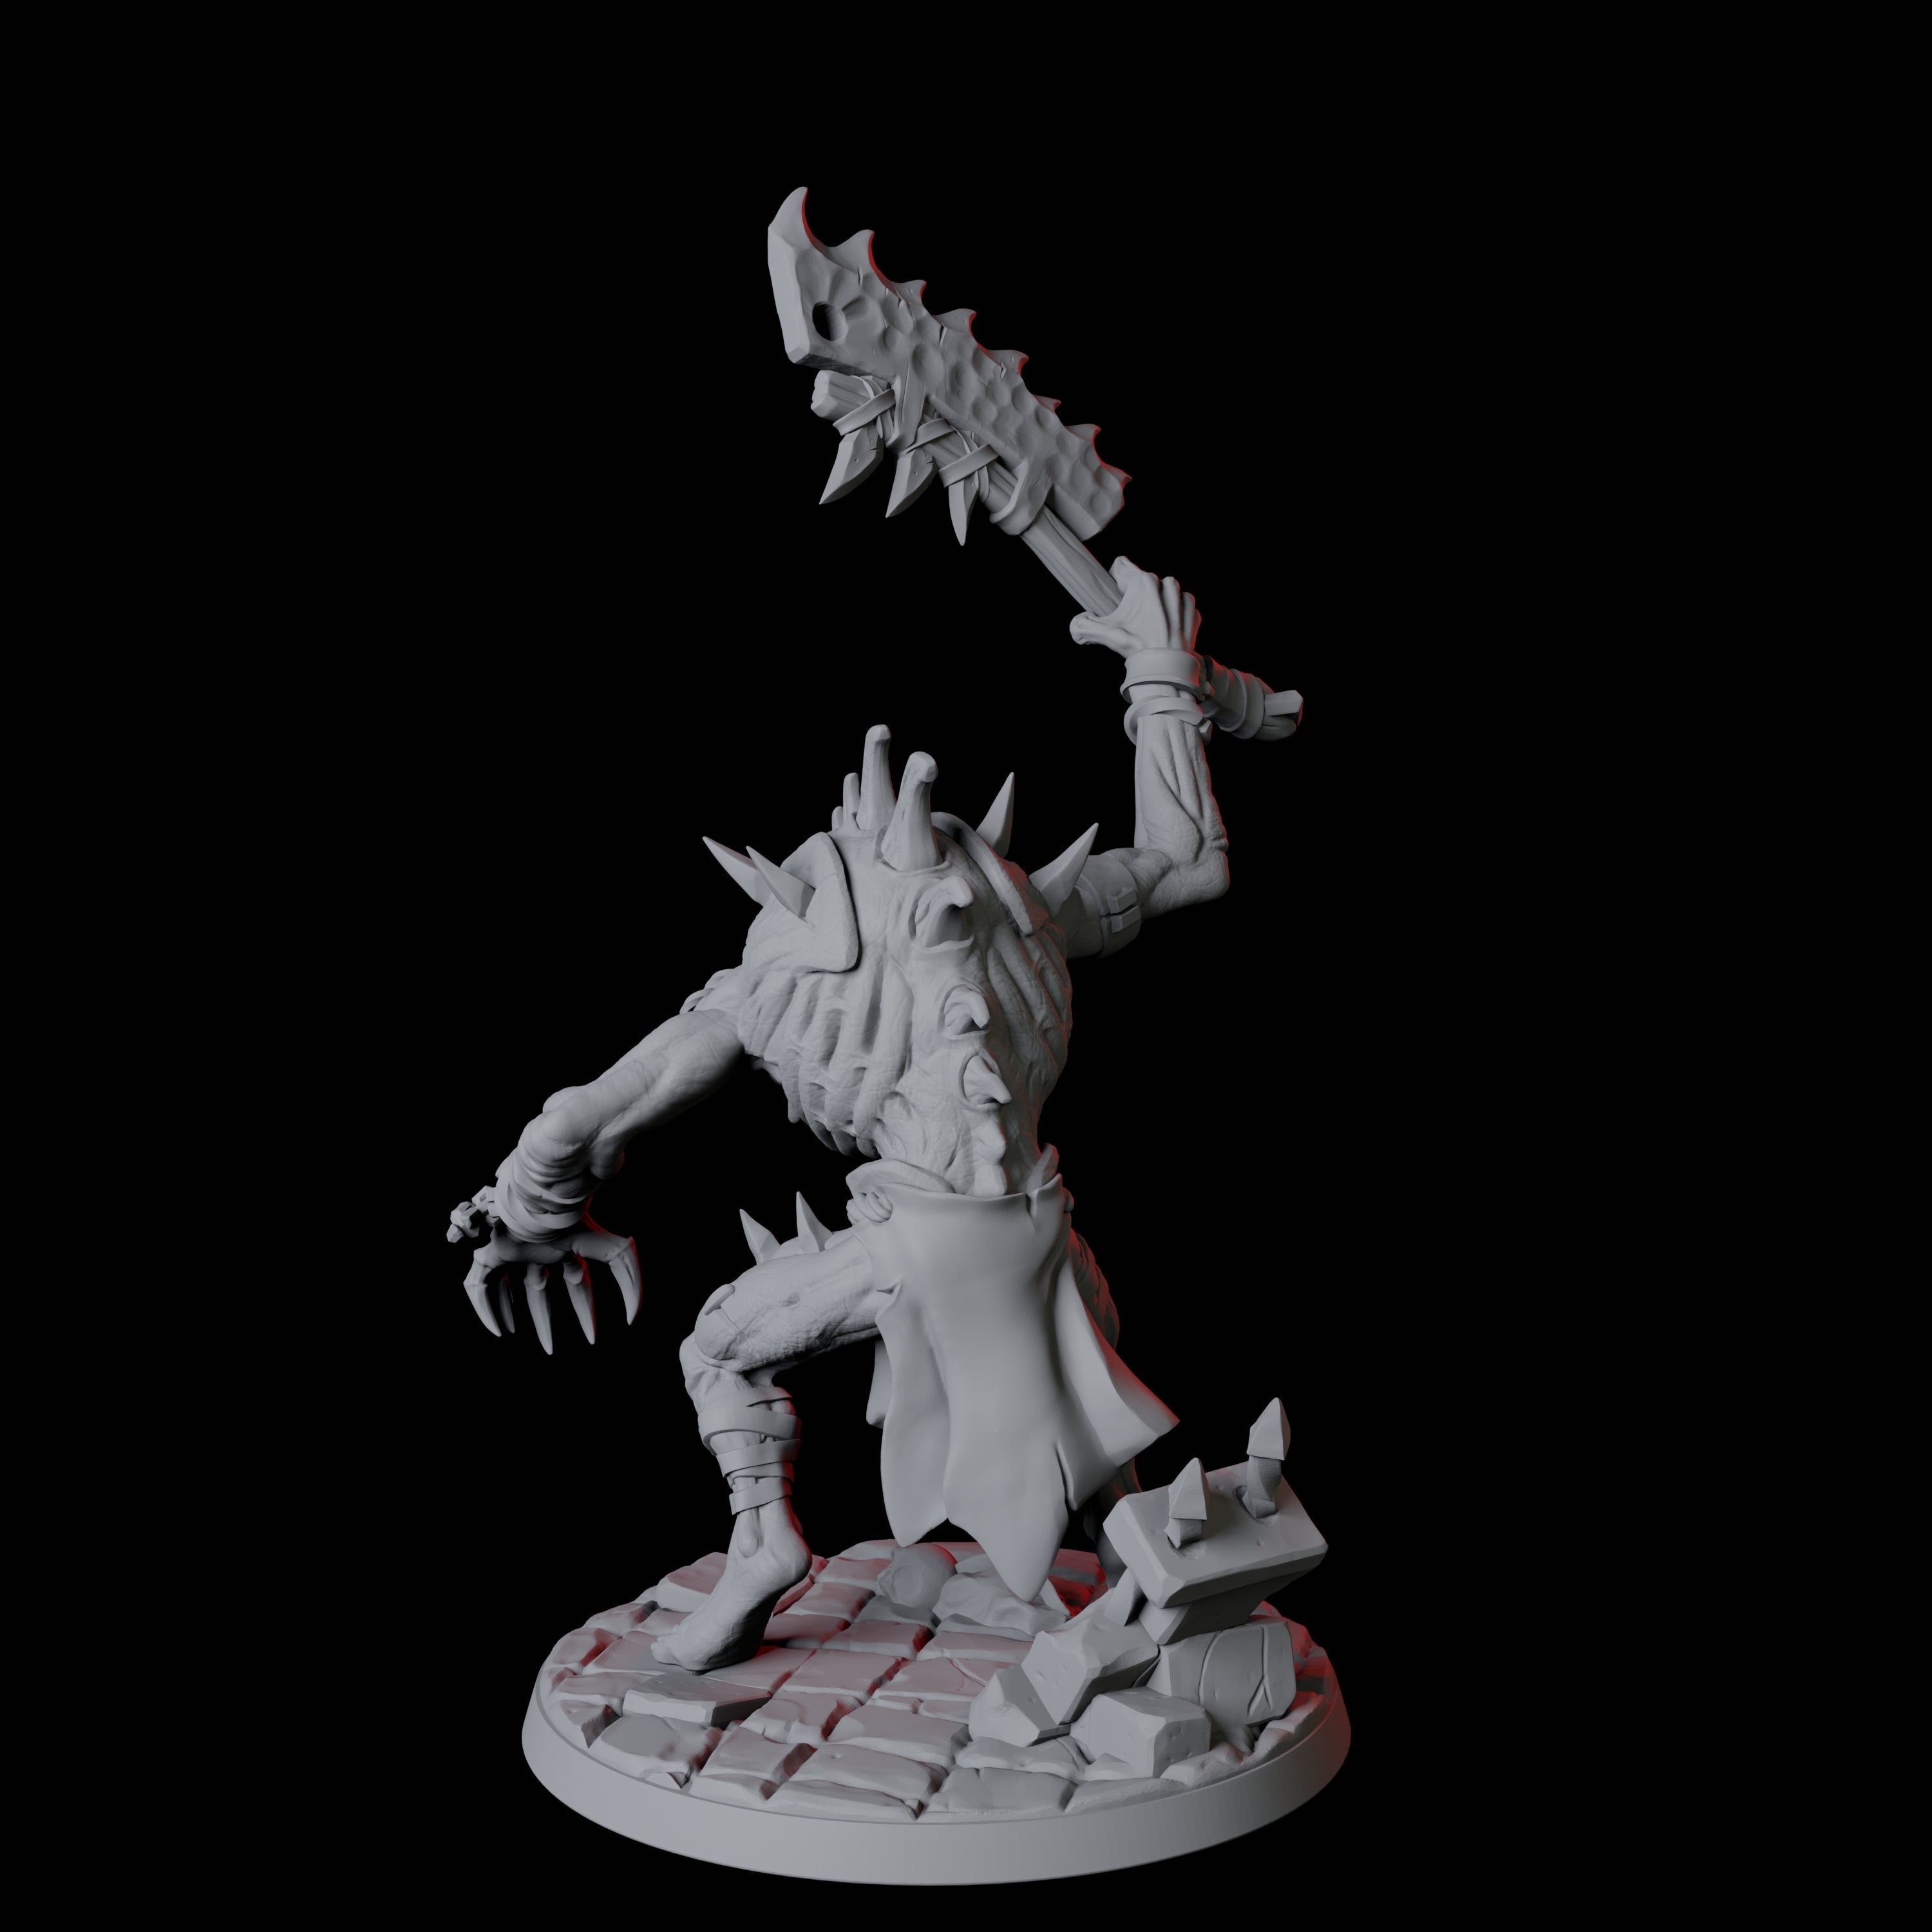 Roaming Ghast C Miniature for Dungeons and Dragons, Pathfinder or other TTRPGs